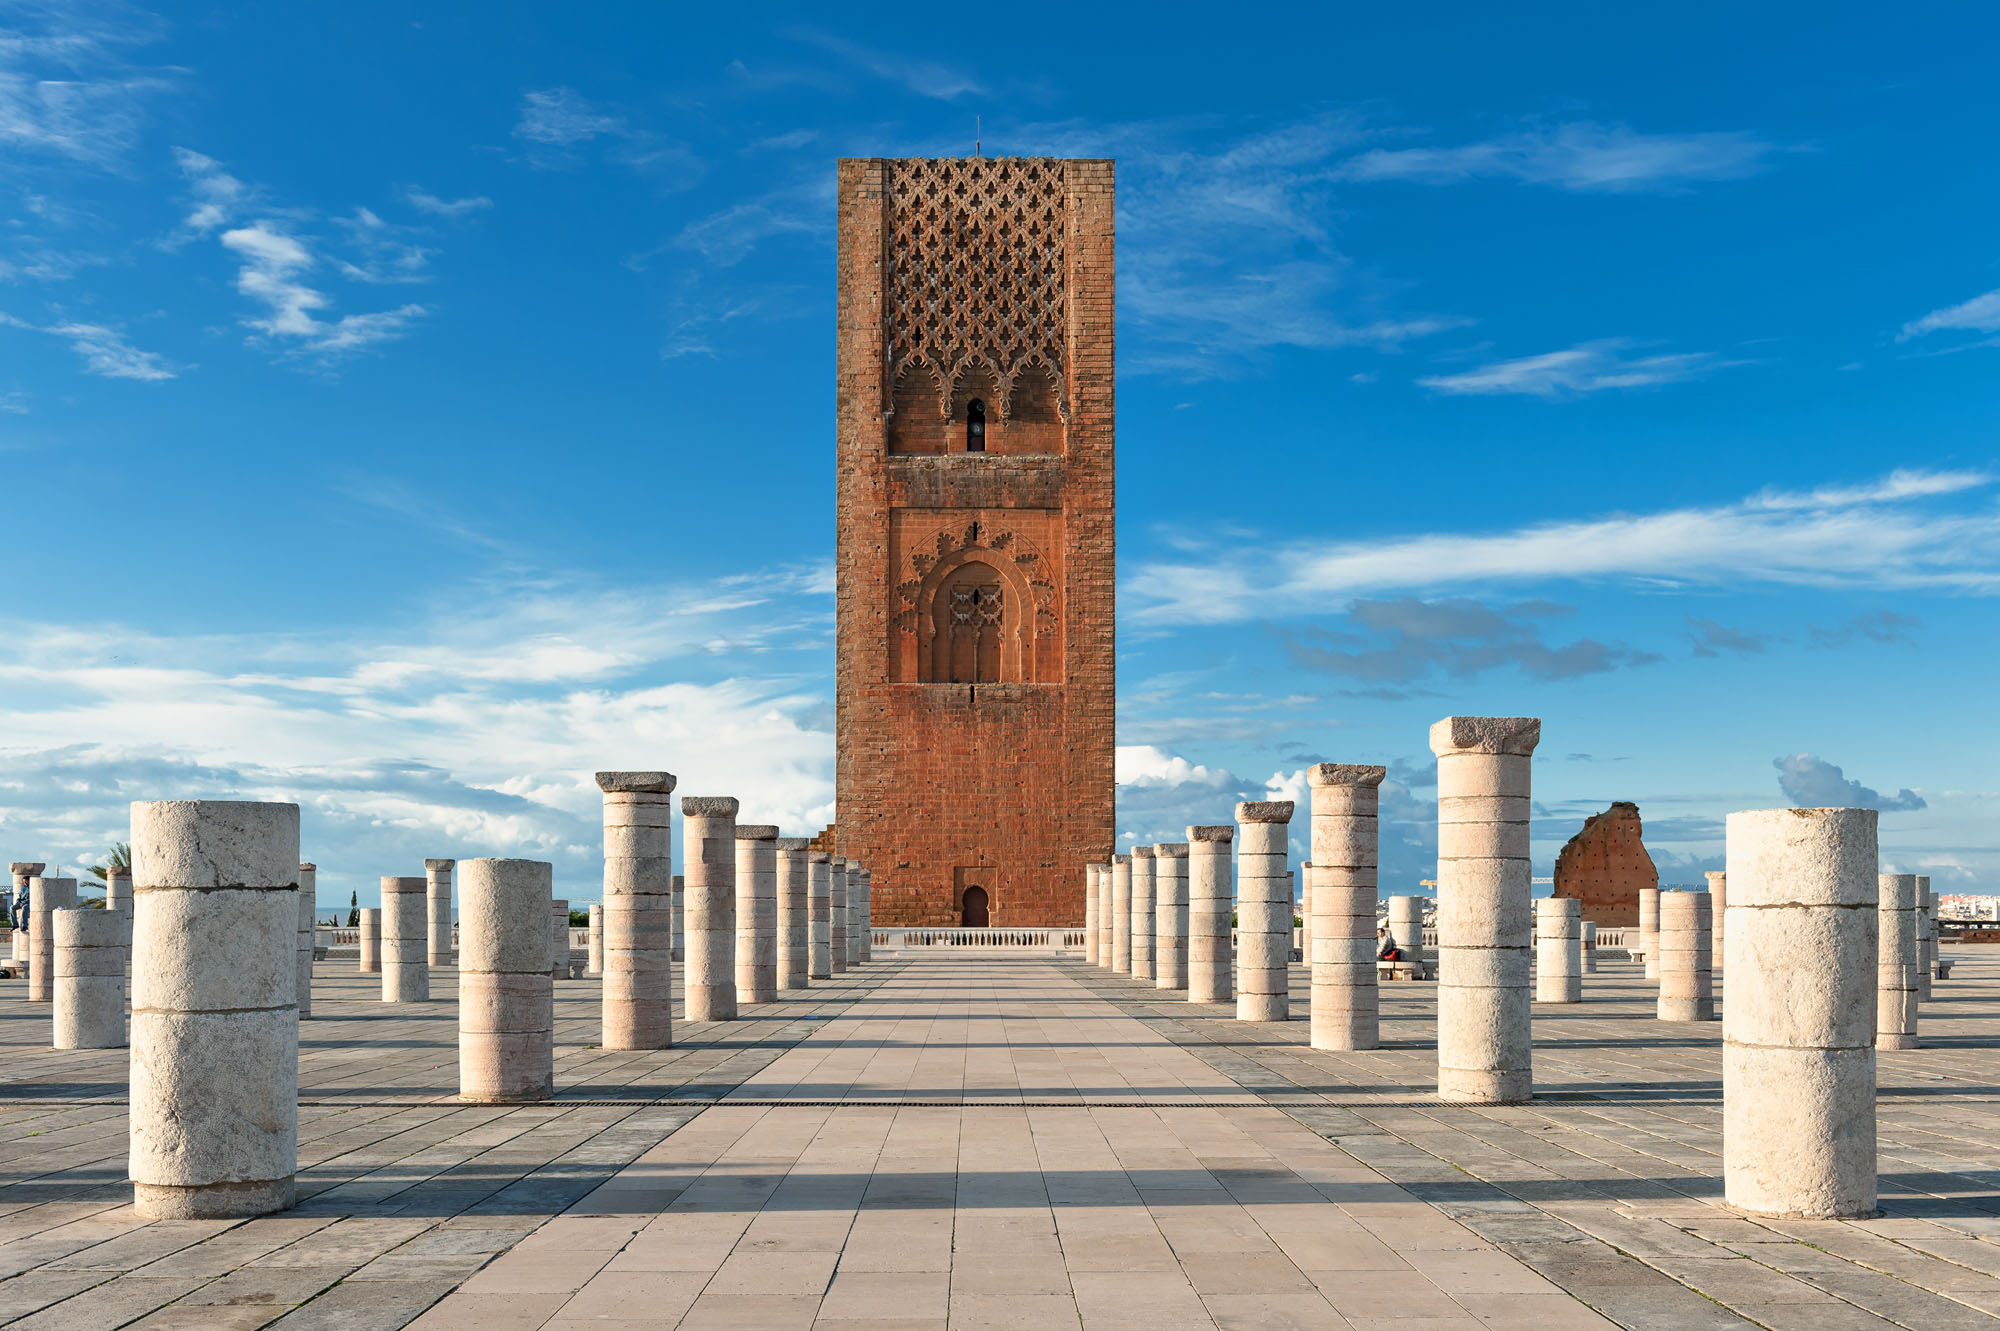 Marrakech Excurions, Combined imperial cities and desert tour of Morocco | 6 days